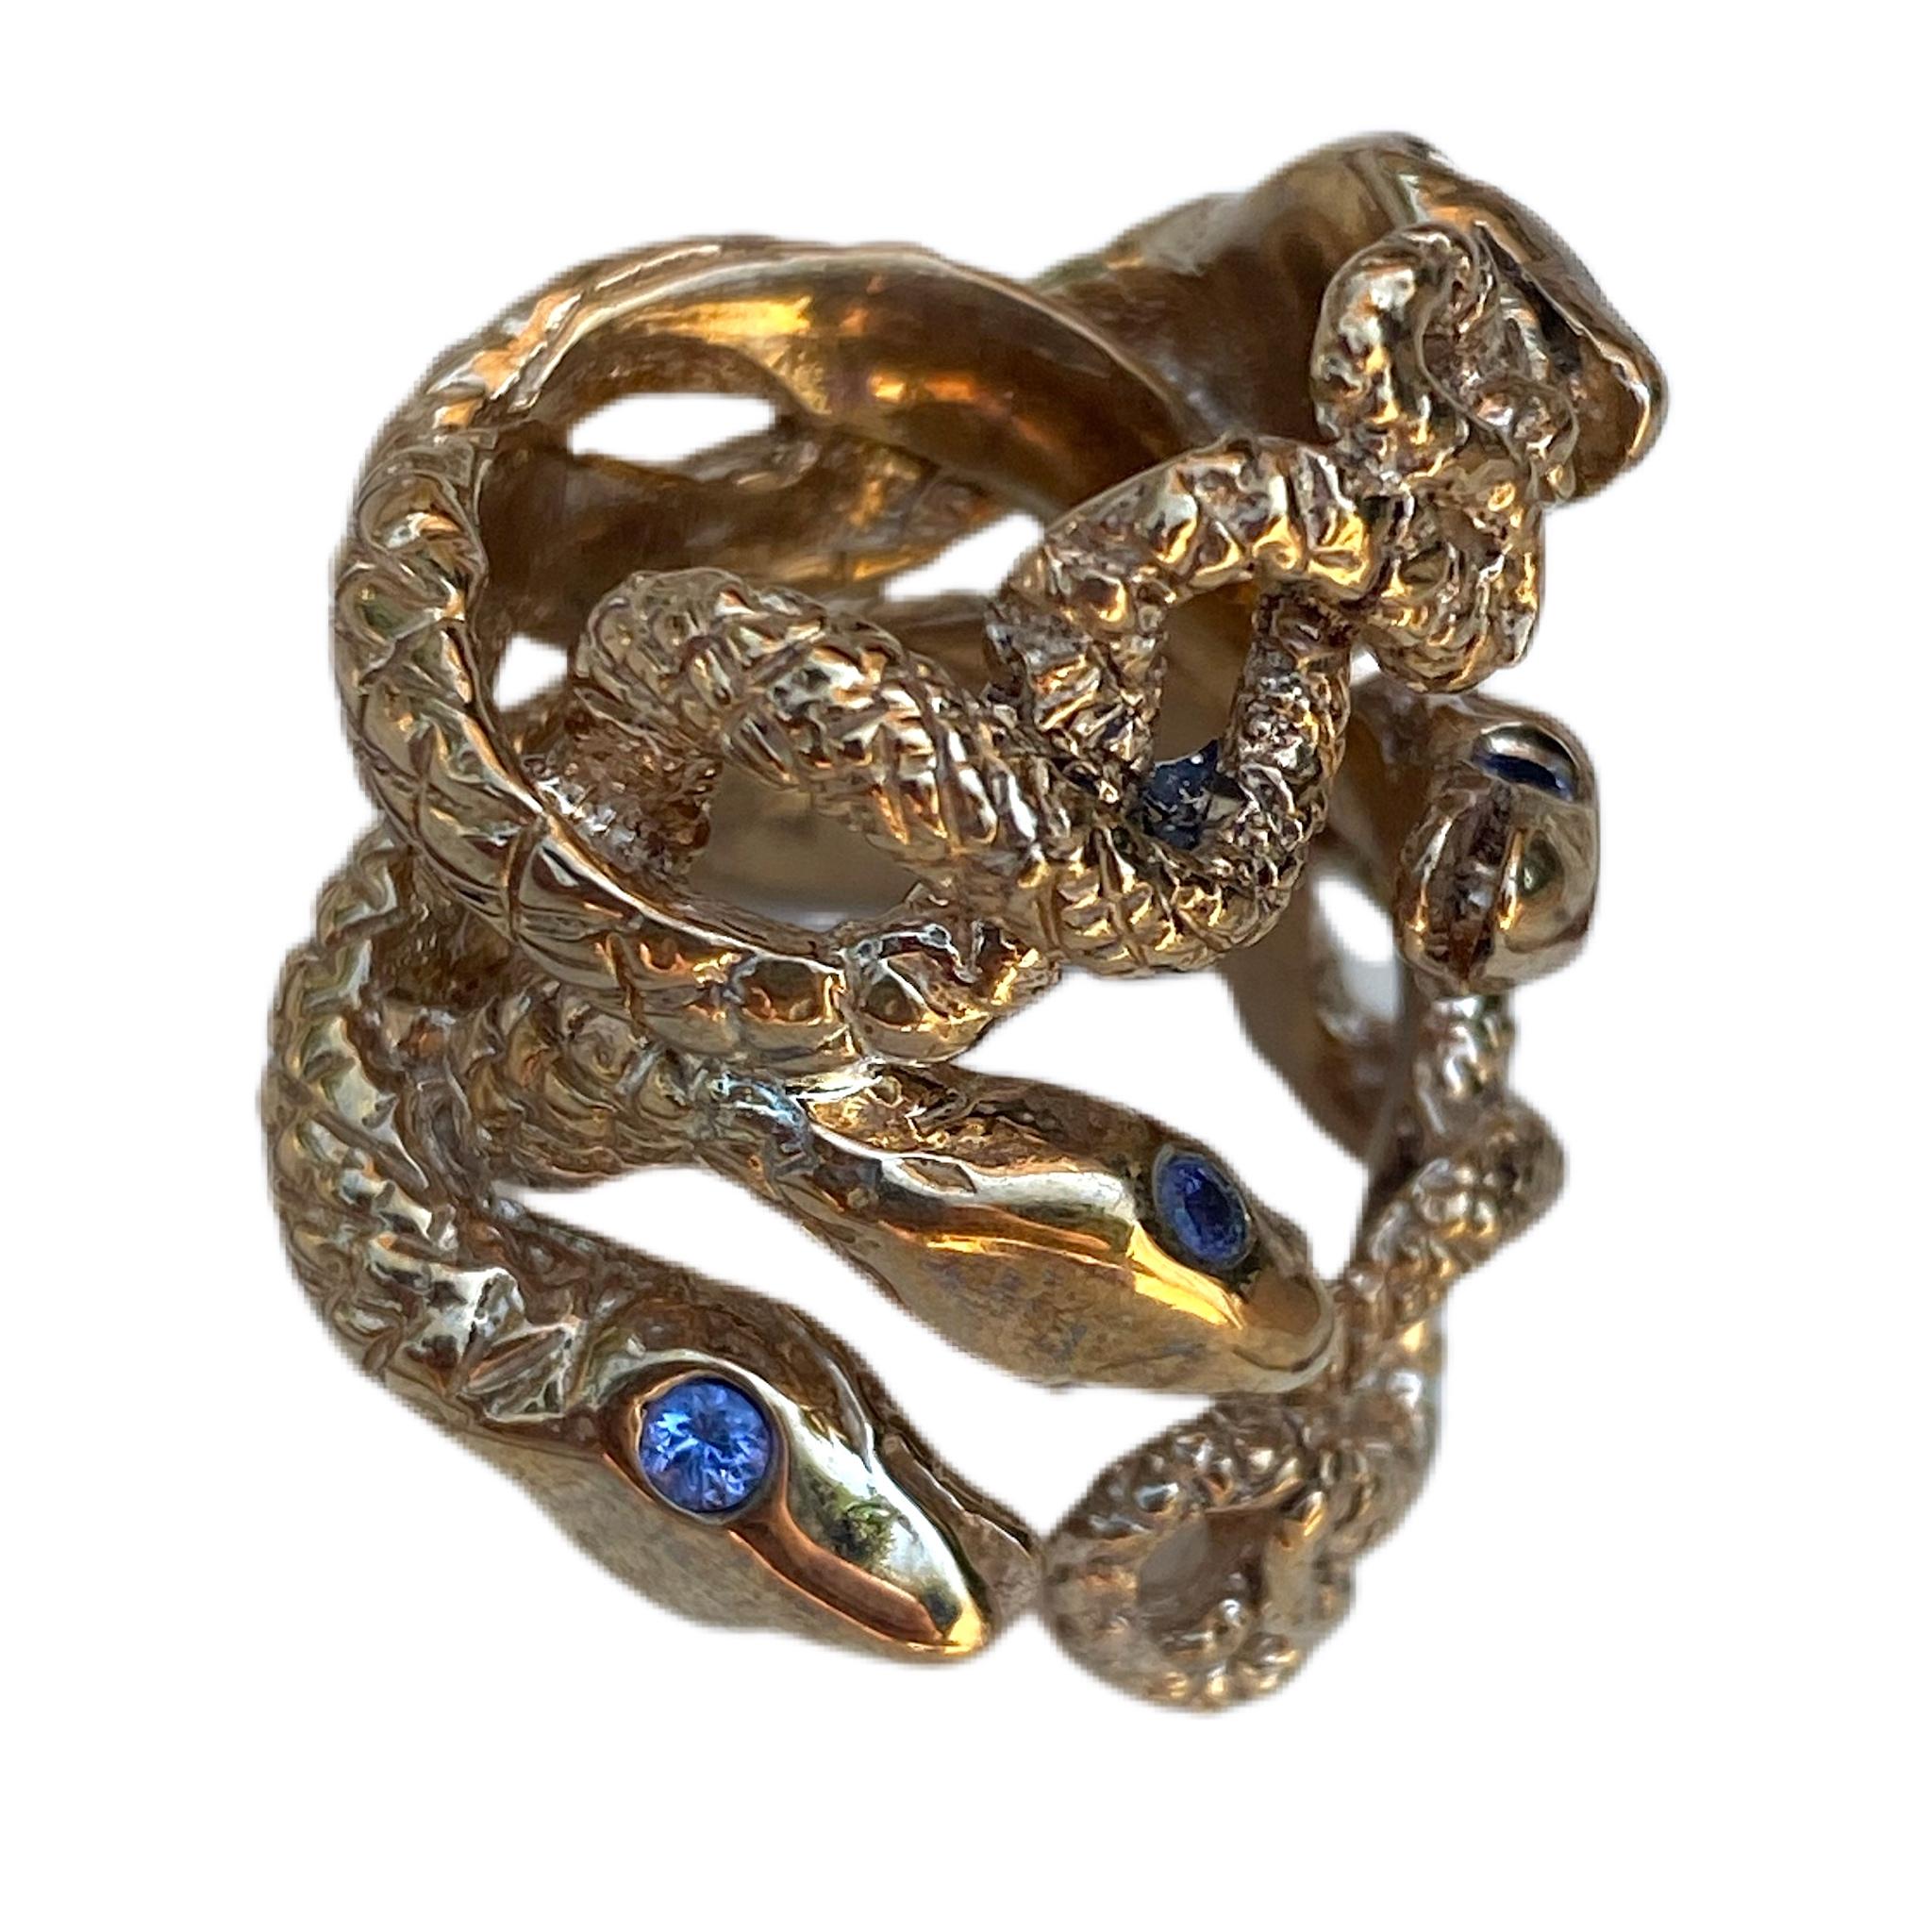 Brilliant Cut Snake Ring Tanzanite Bronze Resizable Cocktail Fashion Ring J Dauphin For Sale